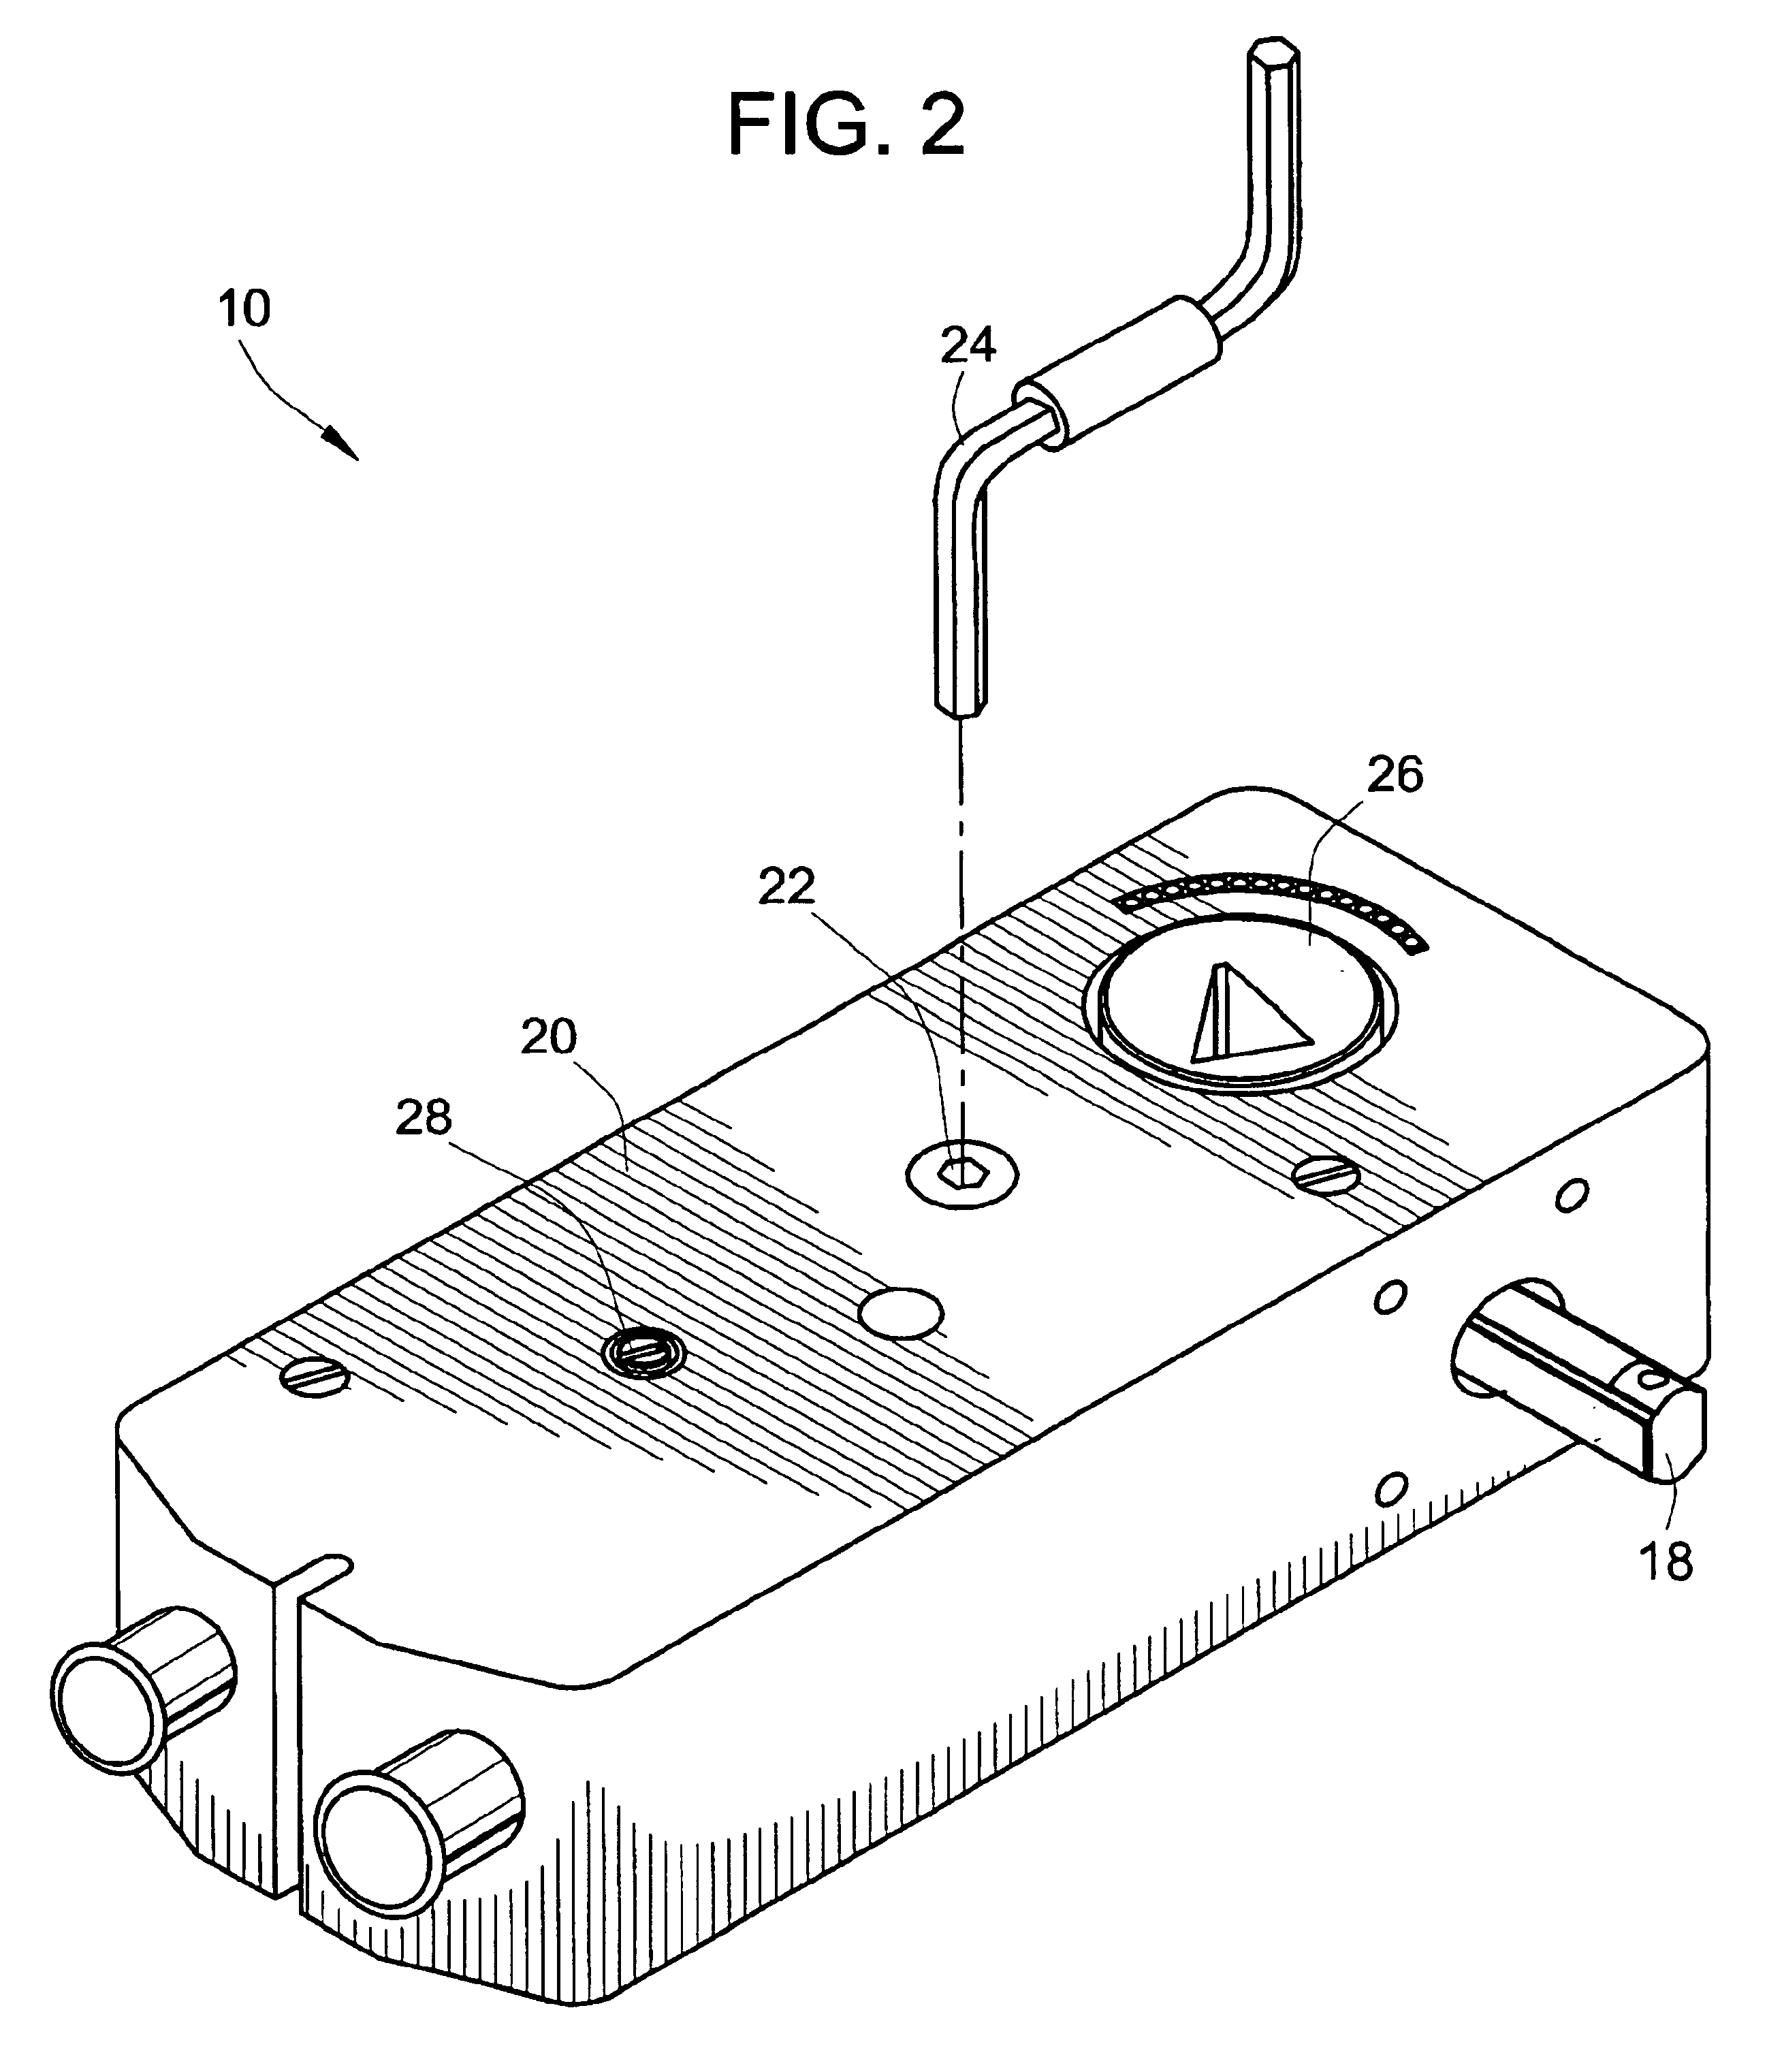 Linear actuator having manual override and locking mechanism